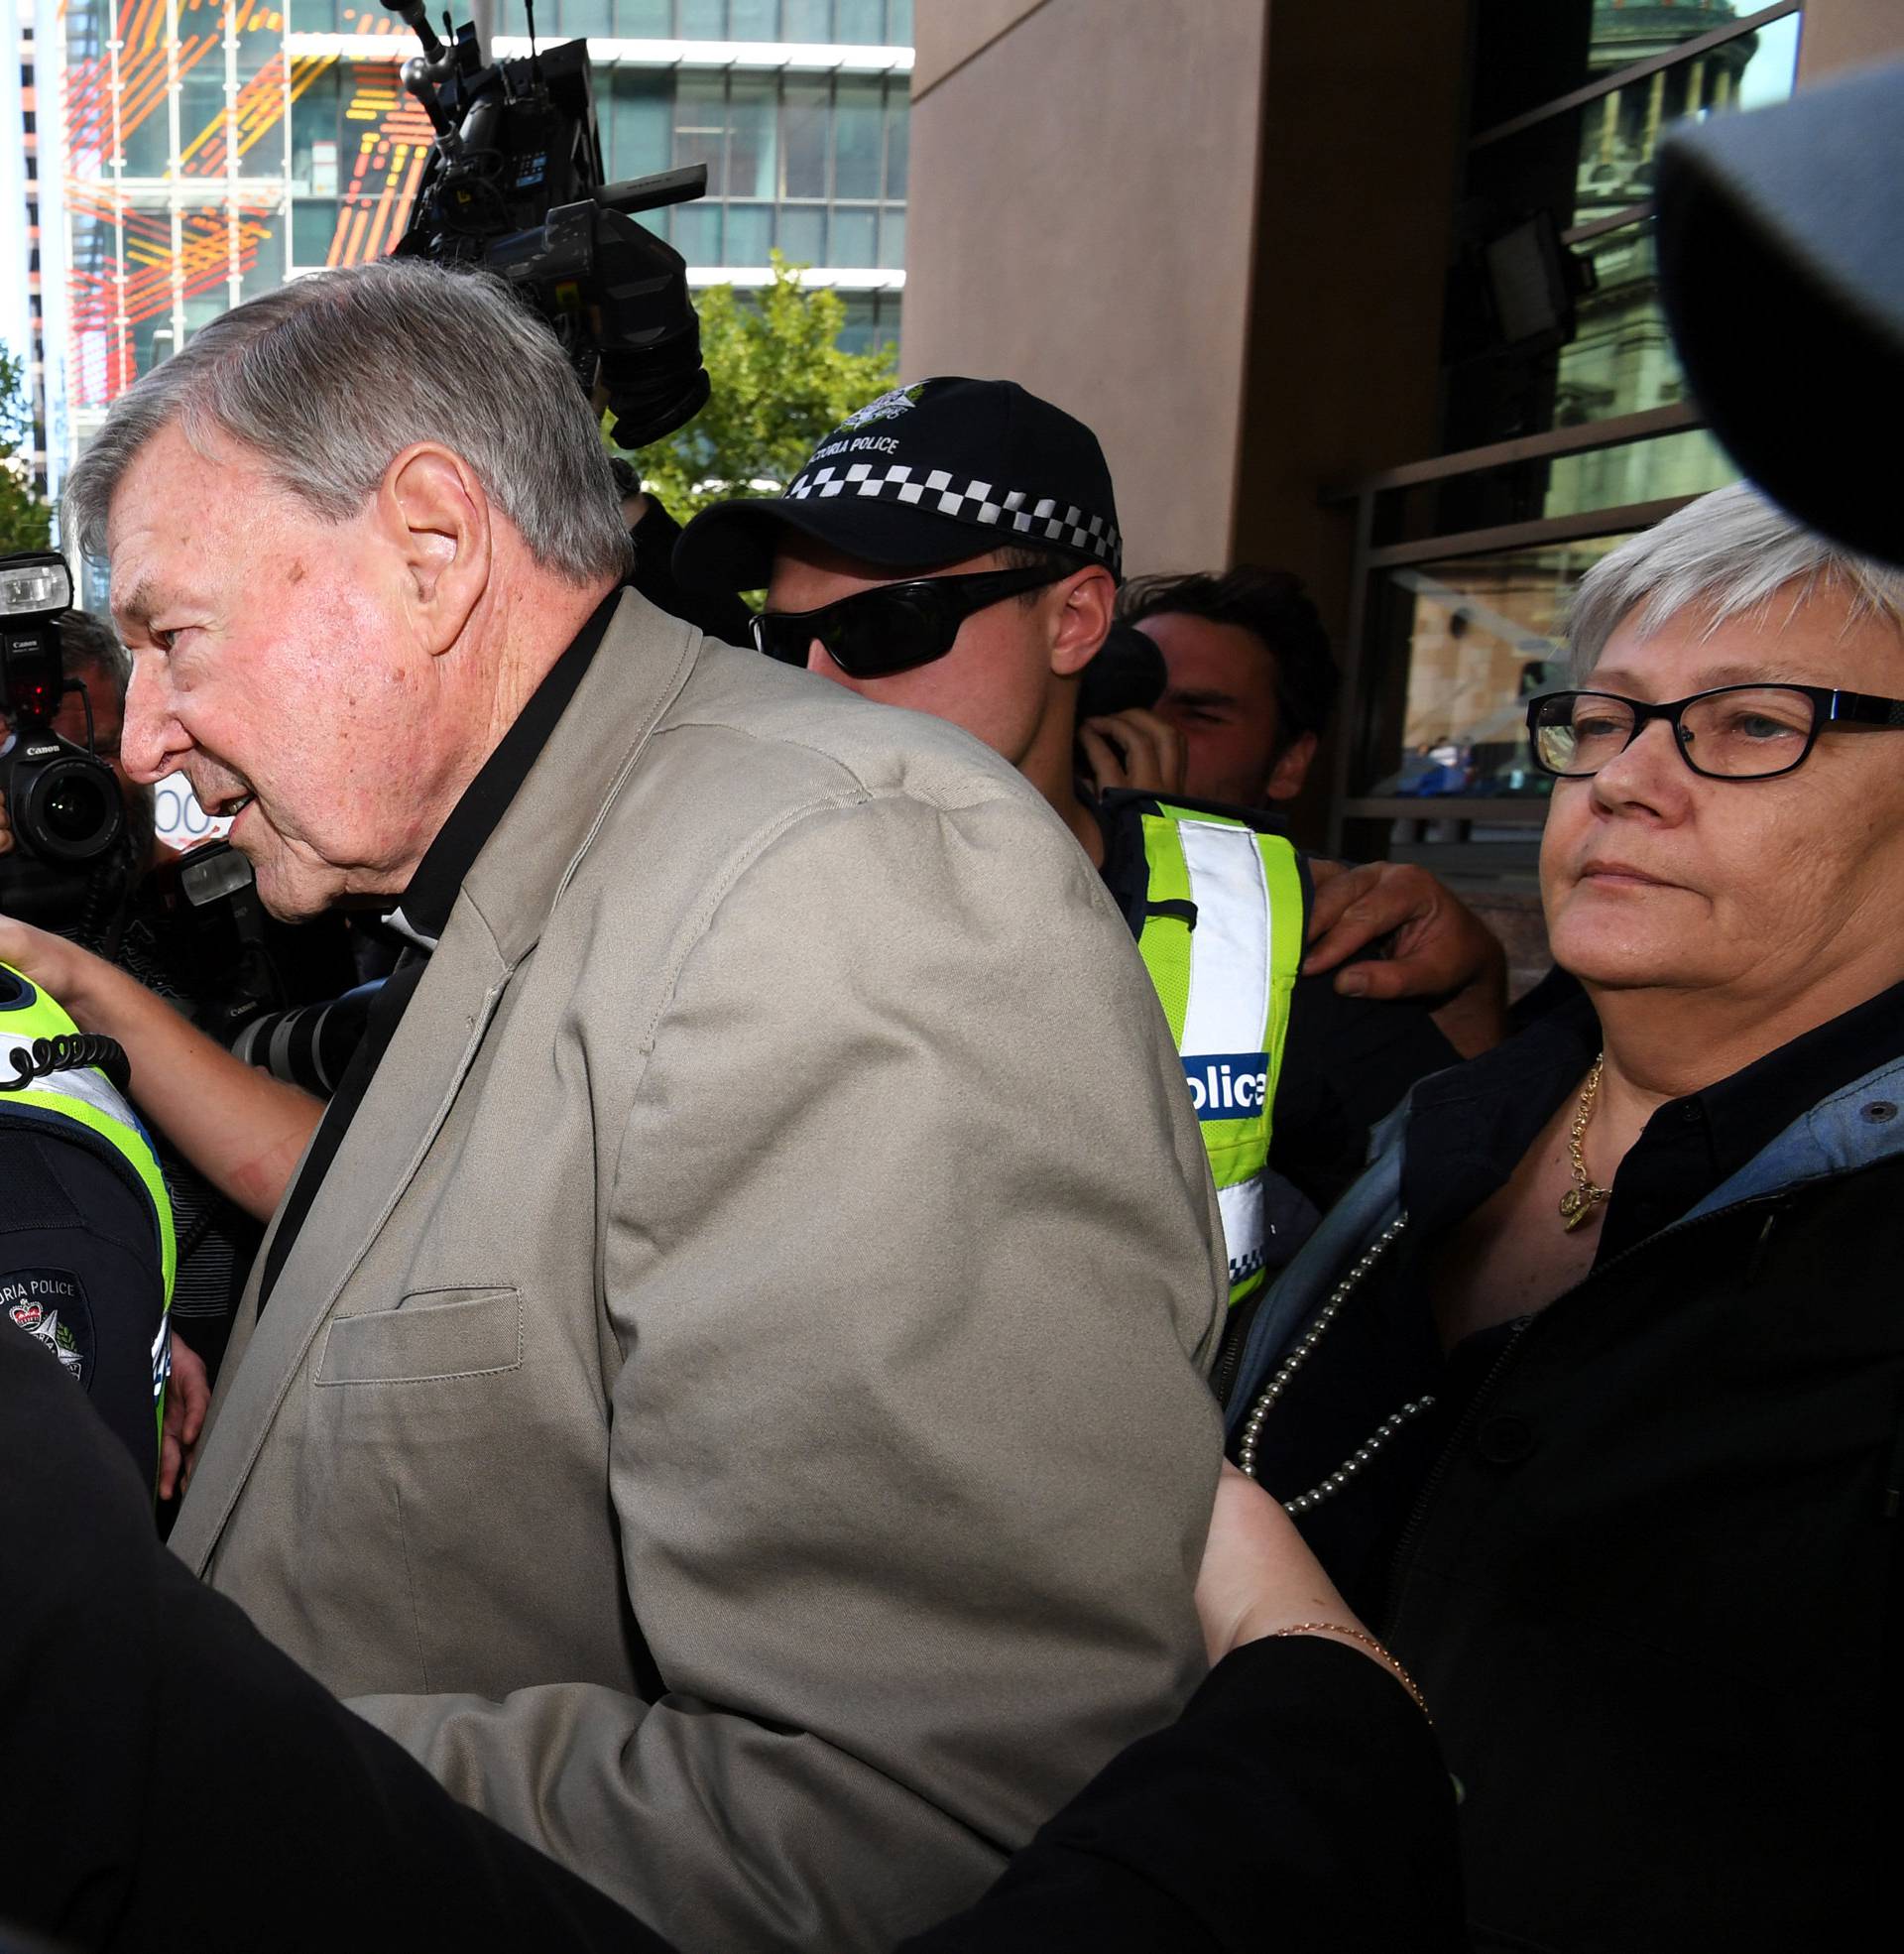 Cardinal George Pell departs the Melbourne Magistrates Court in Melbourne